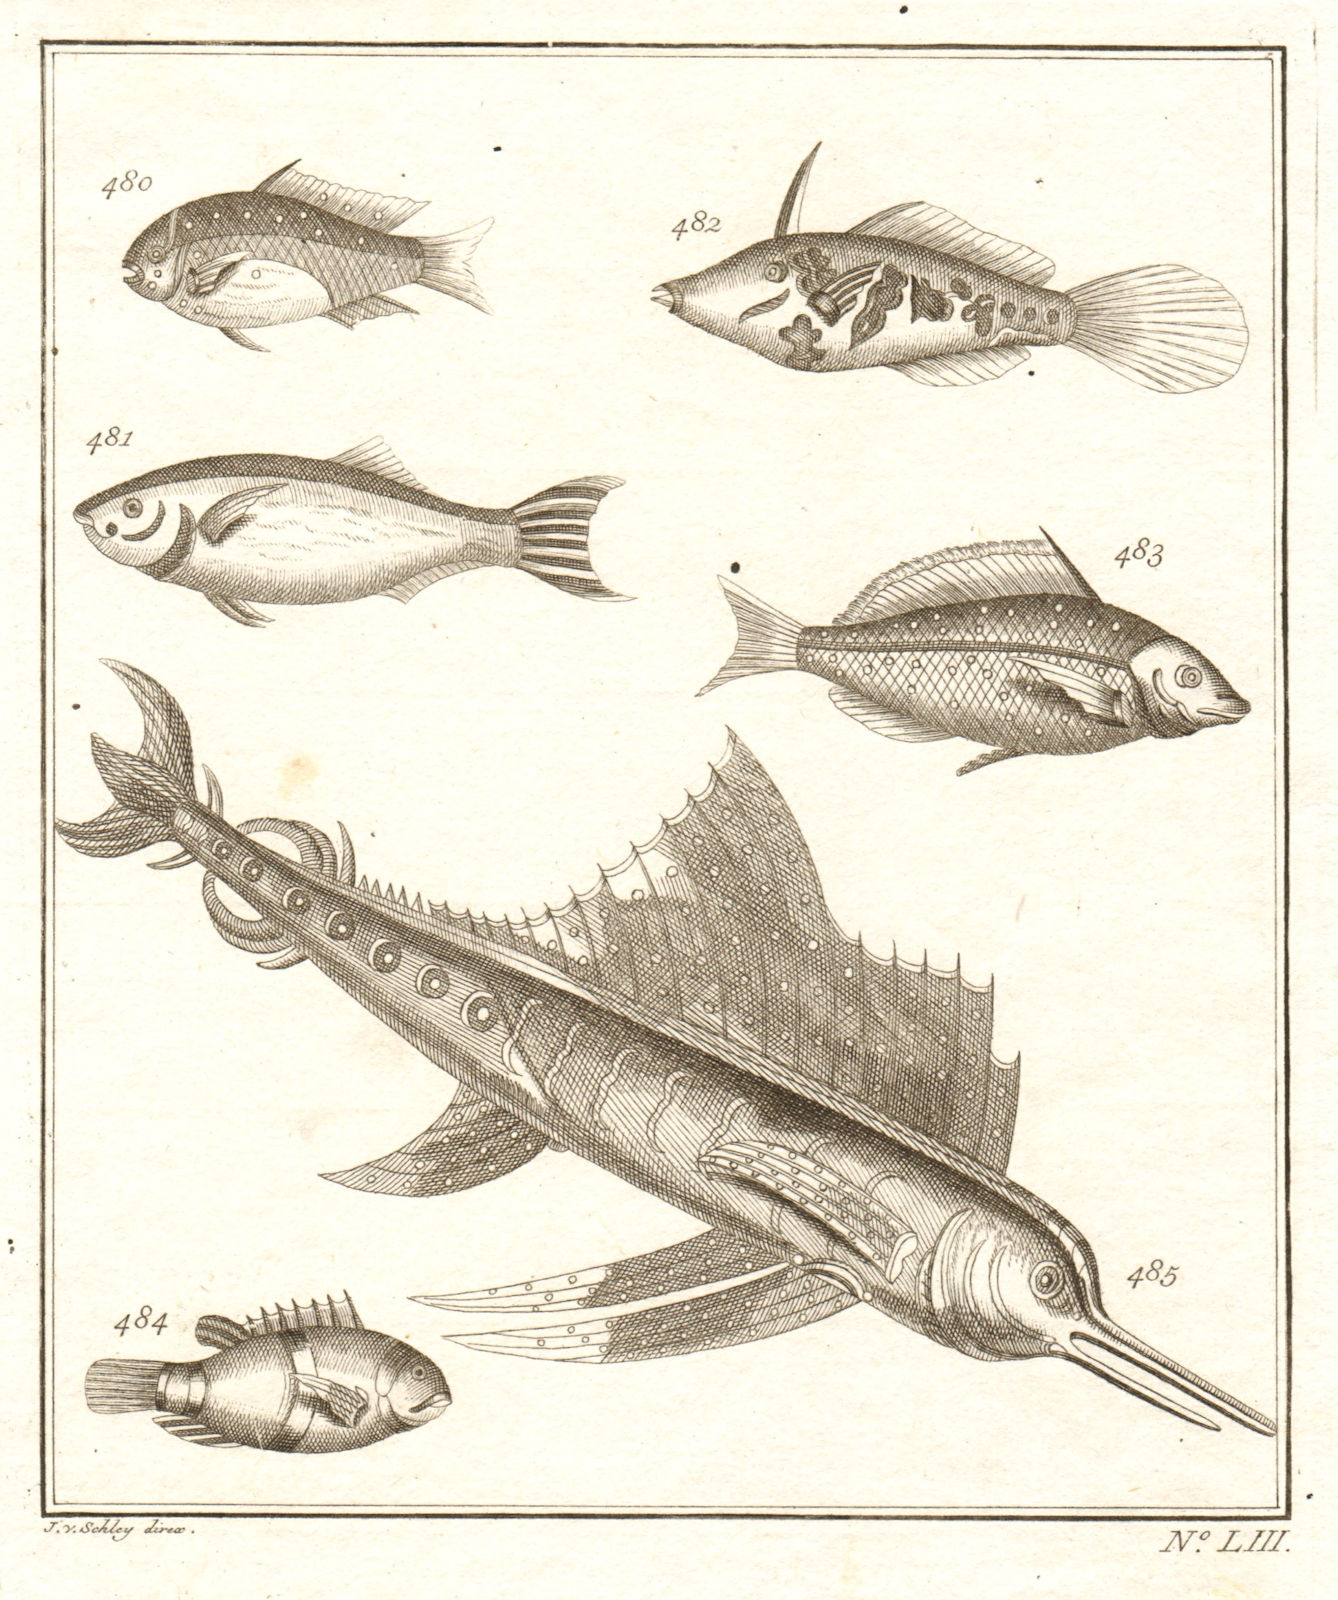 Associate Product LIII. Poissons d'Ambione. Indonesia Moluccas Maluku tropical fish. SCHLEY 1763